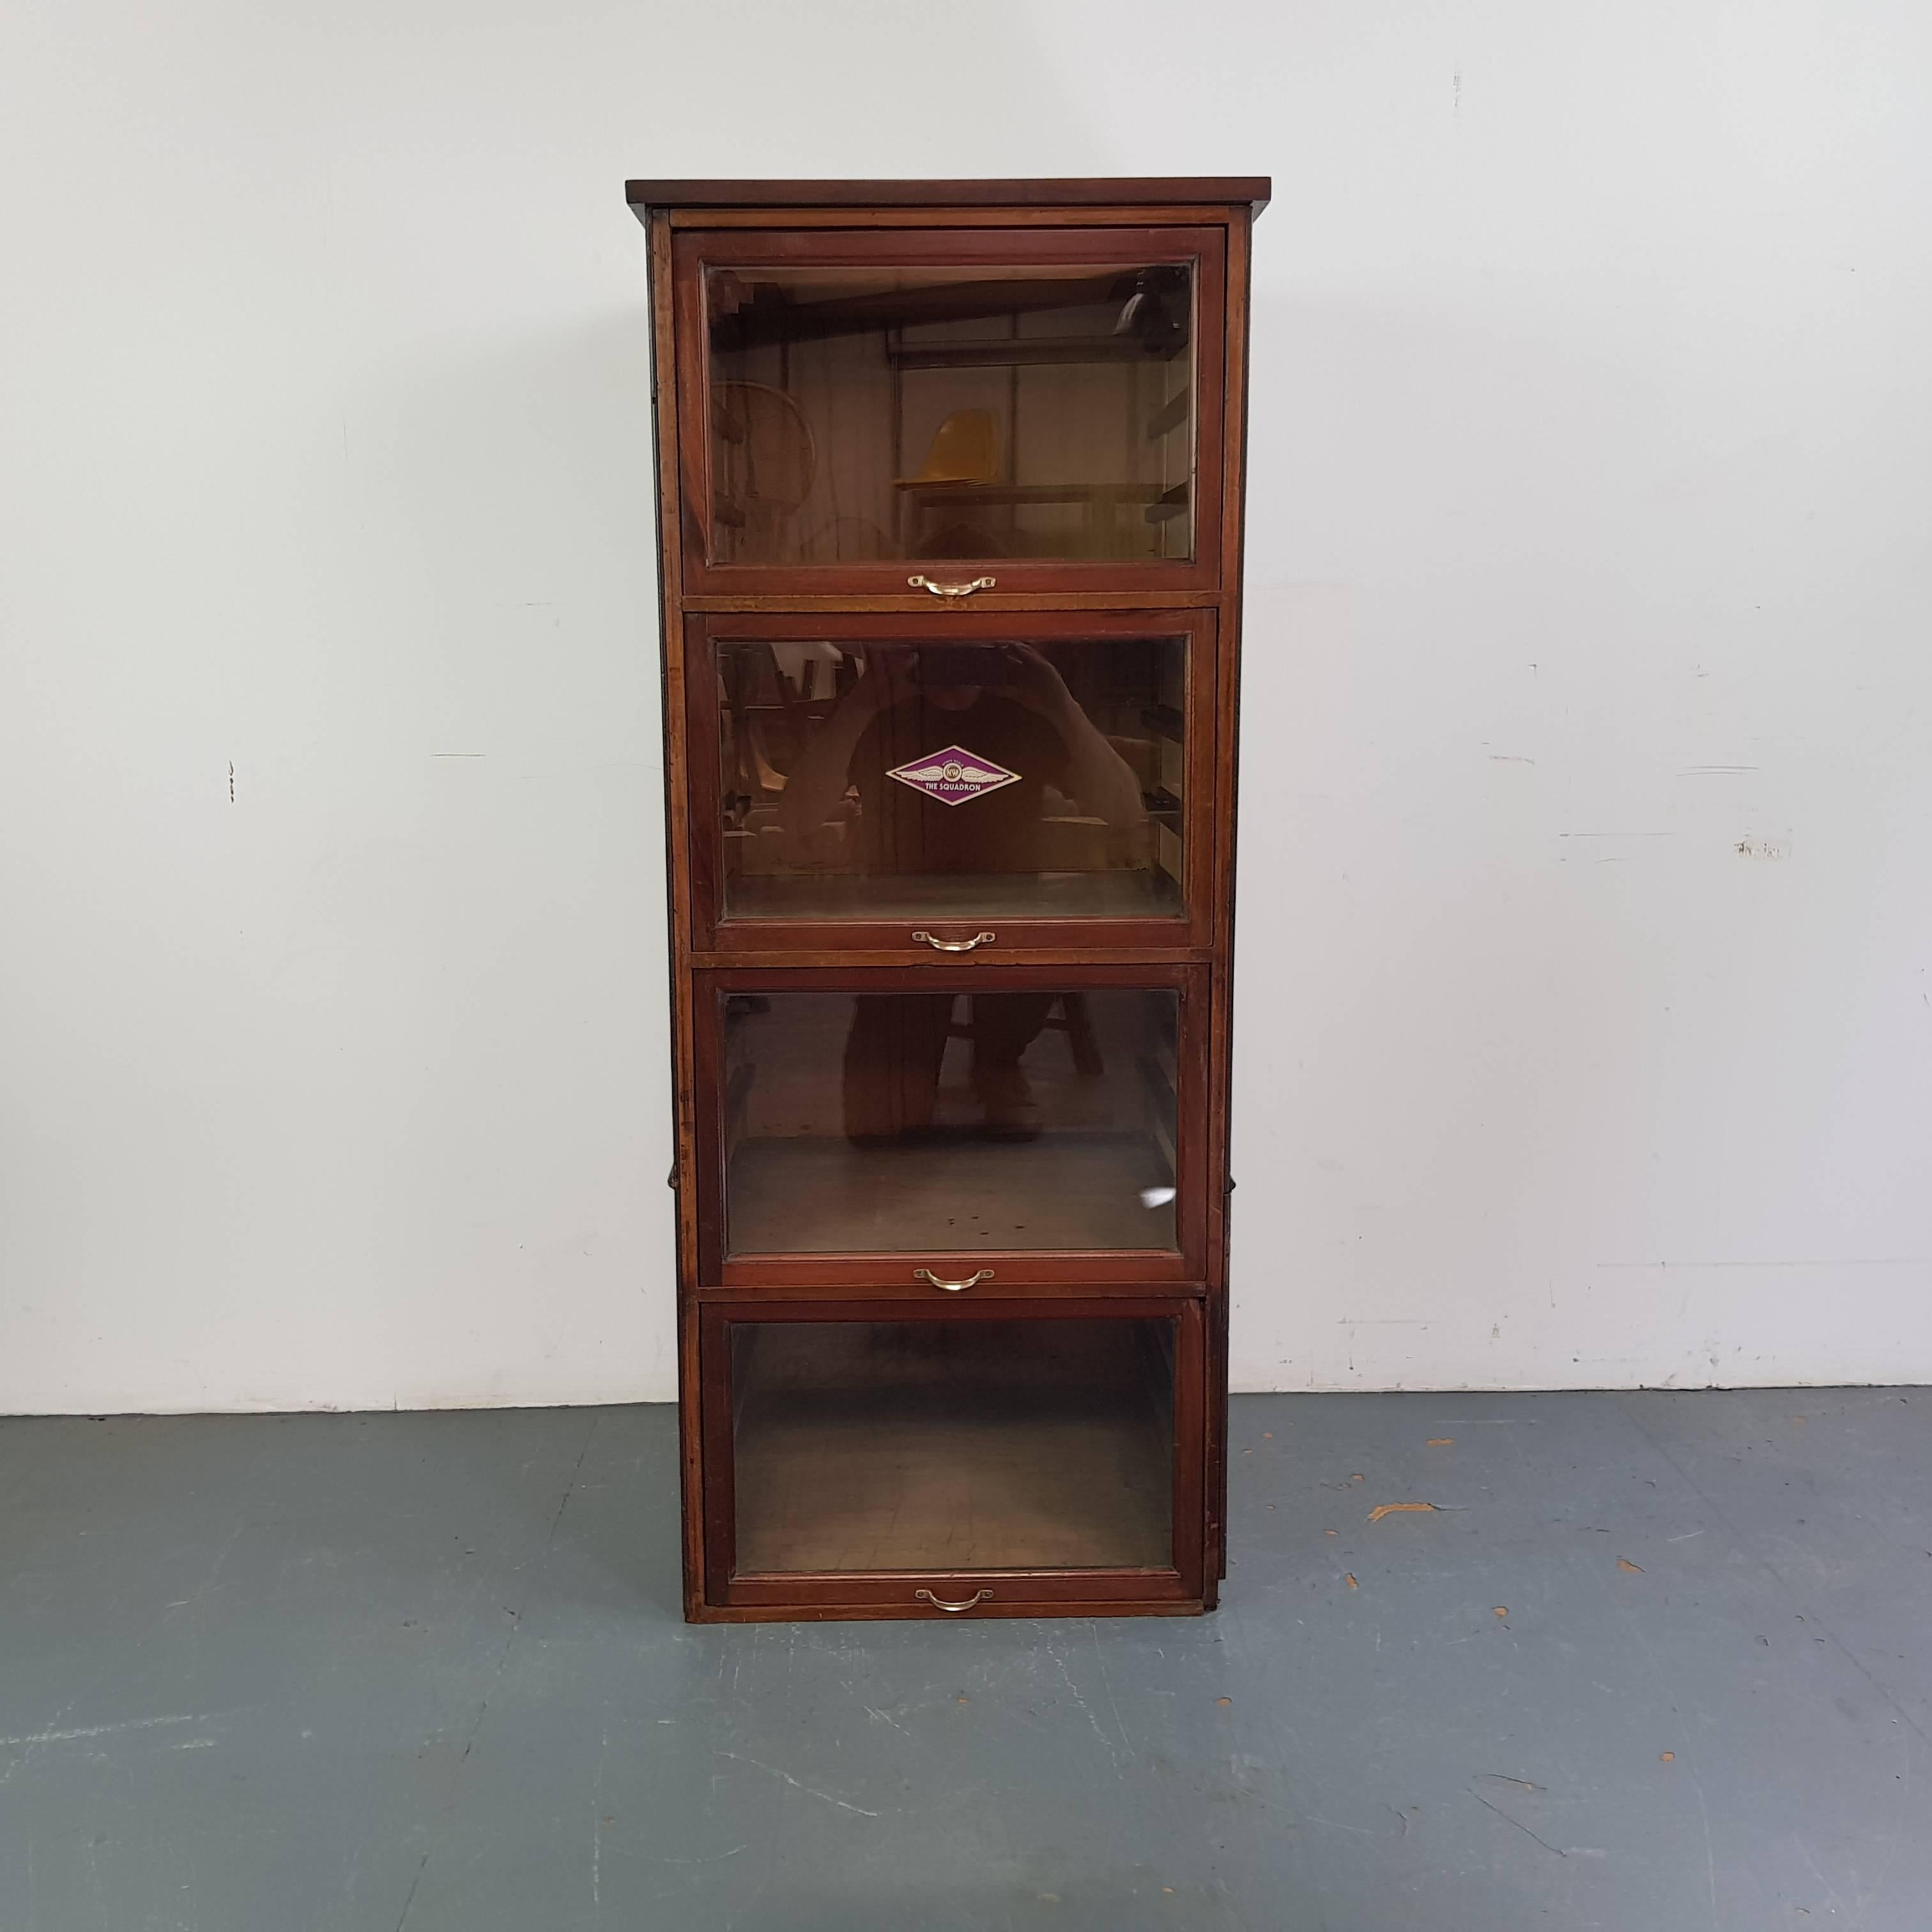 Wonderful haberdashery unit with the RAF badge on it. Four sections with up and over glass doors.

Approximate dimensions:

Width 53cm

Depth 54cm

Height 128cm


Inner compartments
Width 46cm

Depth 50cm

Height 26cm

In good